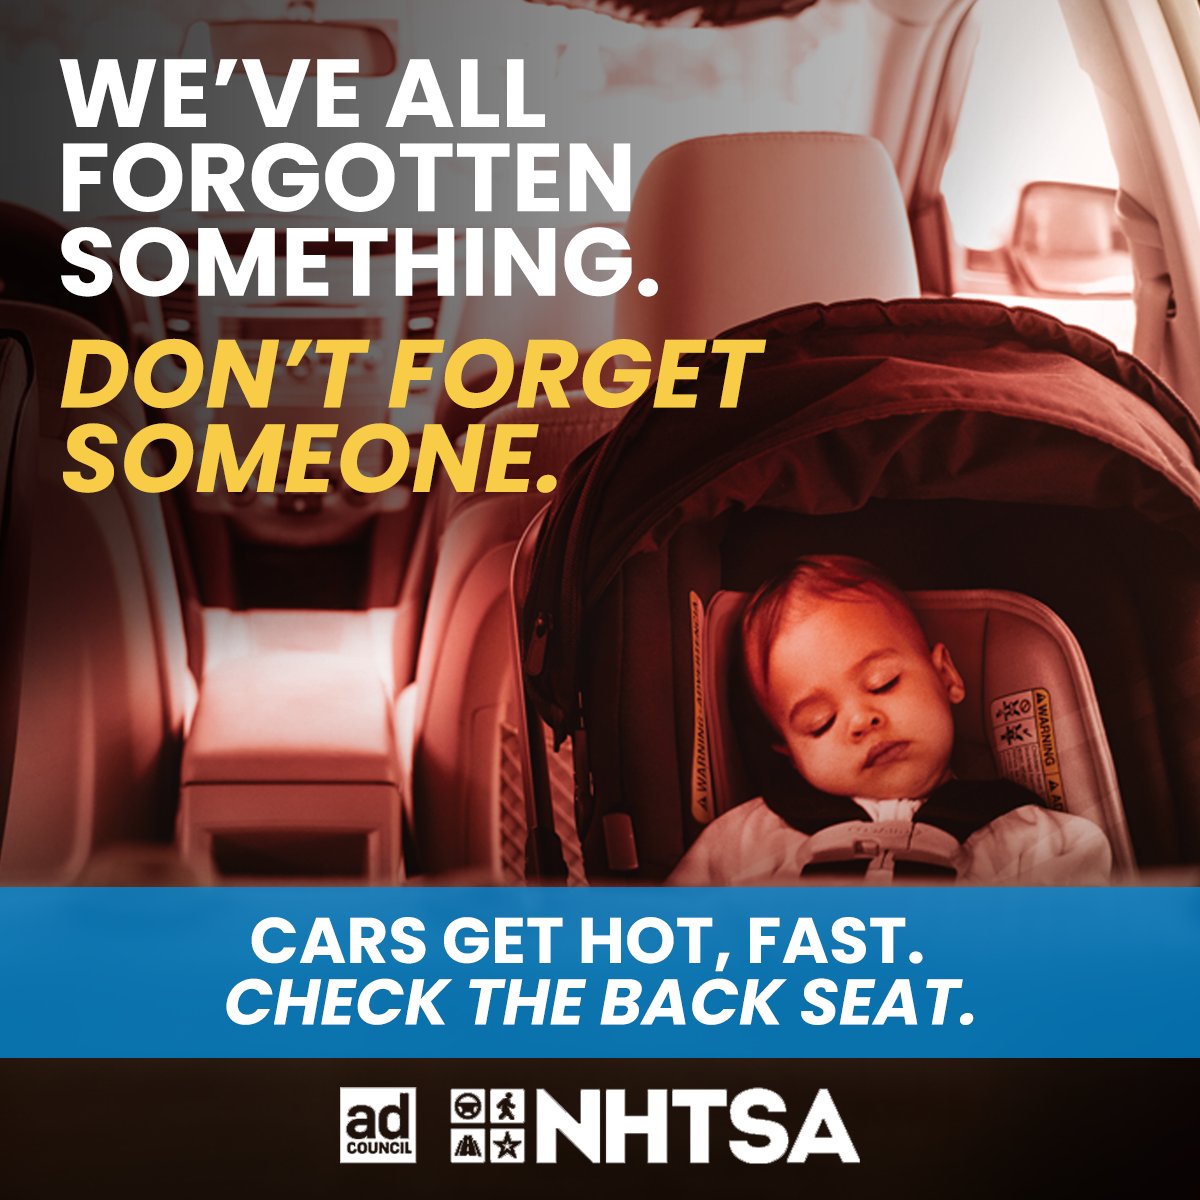 In 2023, 29 children died of heatstroke in vehicles. Don’t let this preventable tragedy happen to your family. Visit NHTSA.gov/heatstroke to learn how to stop these deaths. #HeatstrokeKills #CheckForBaby